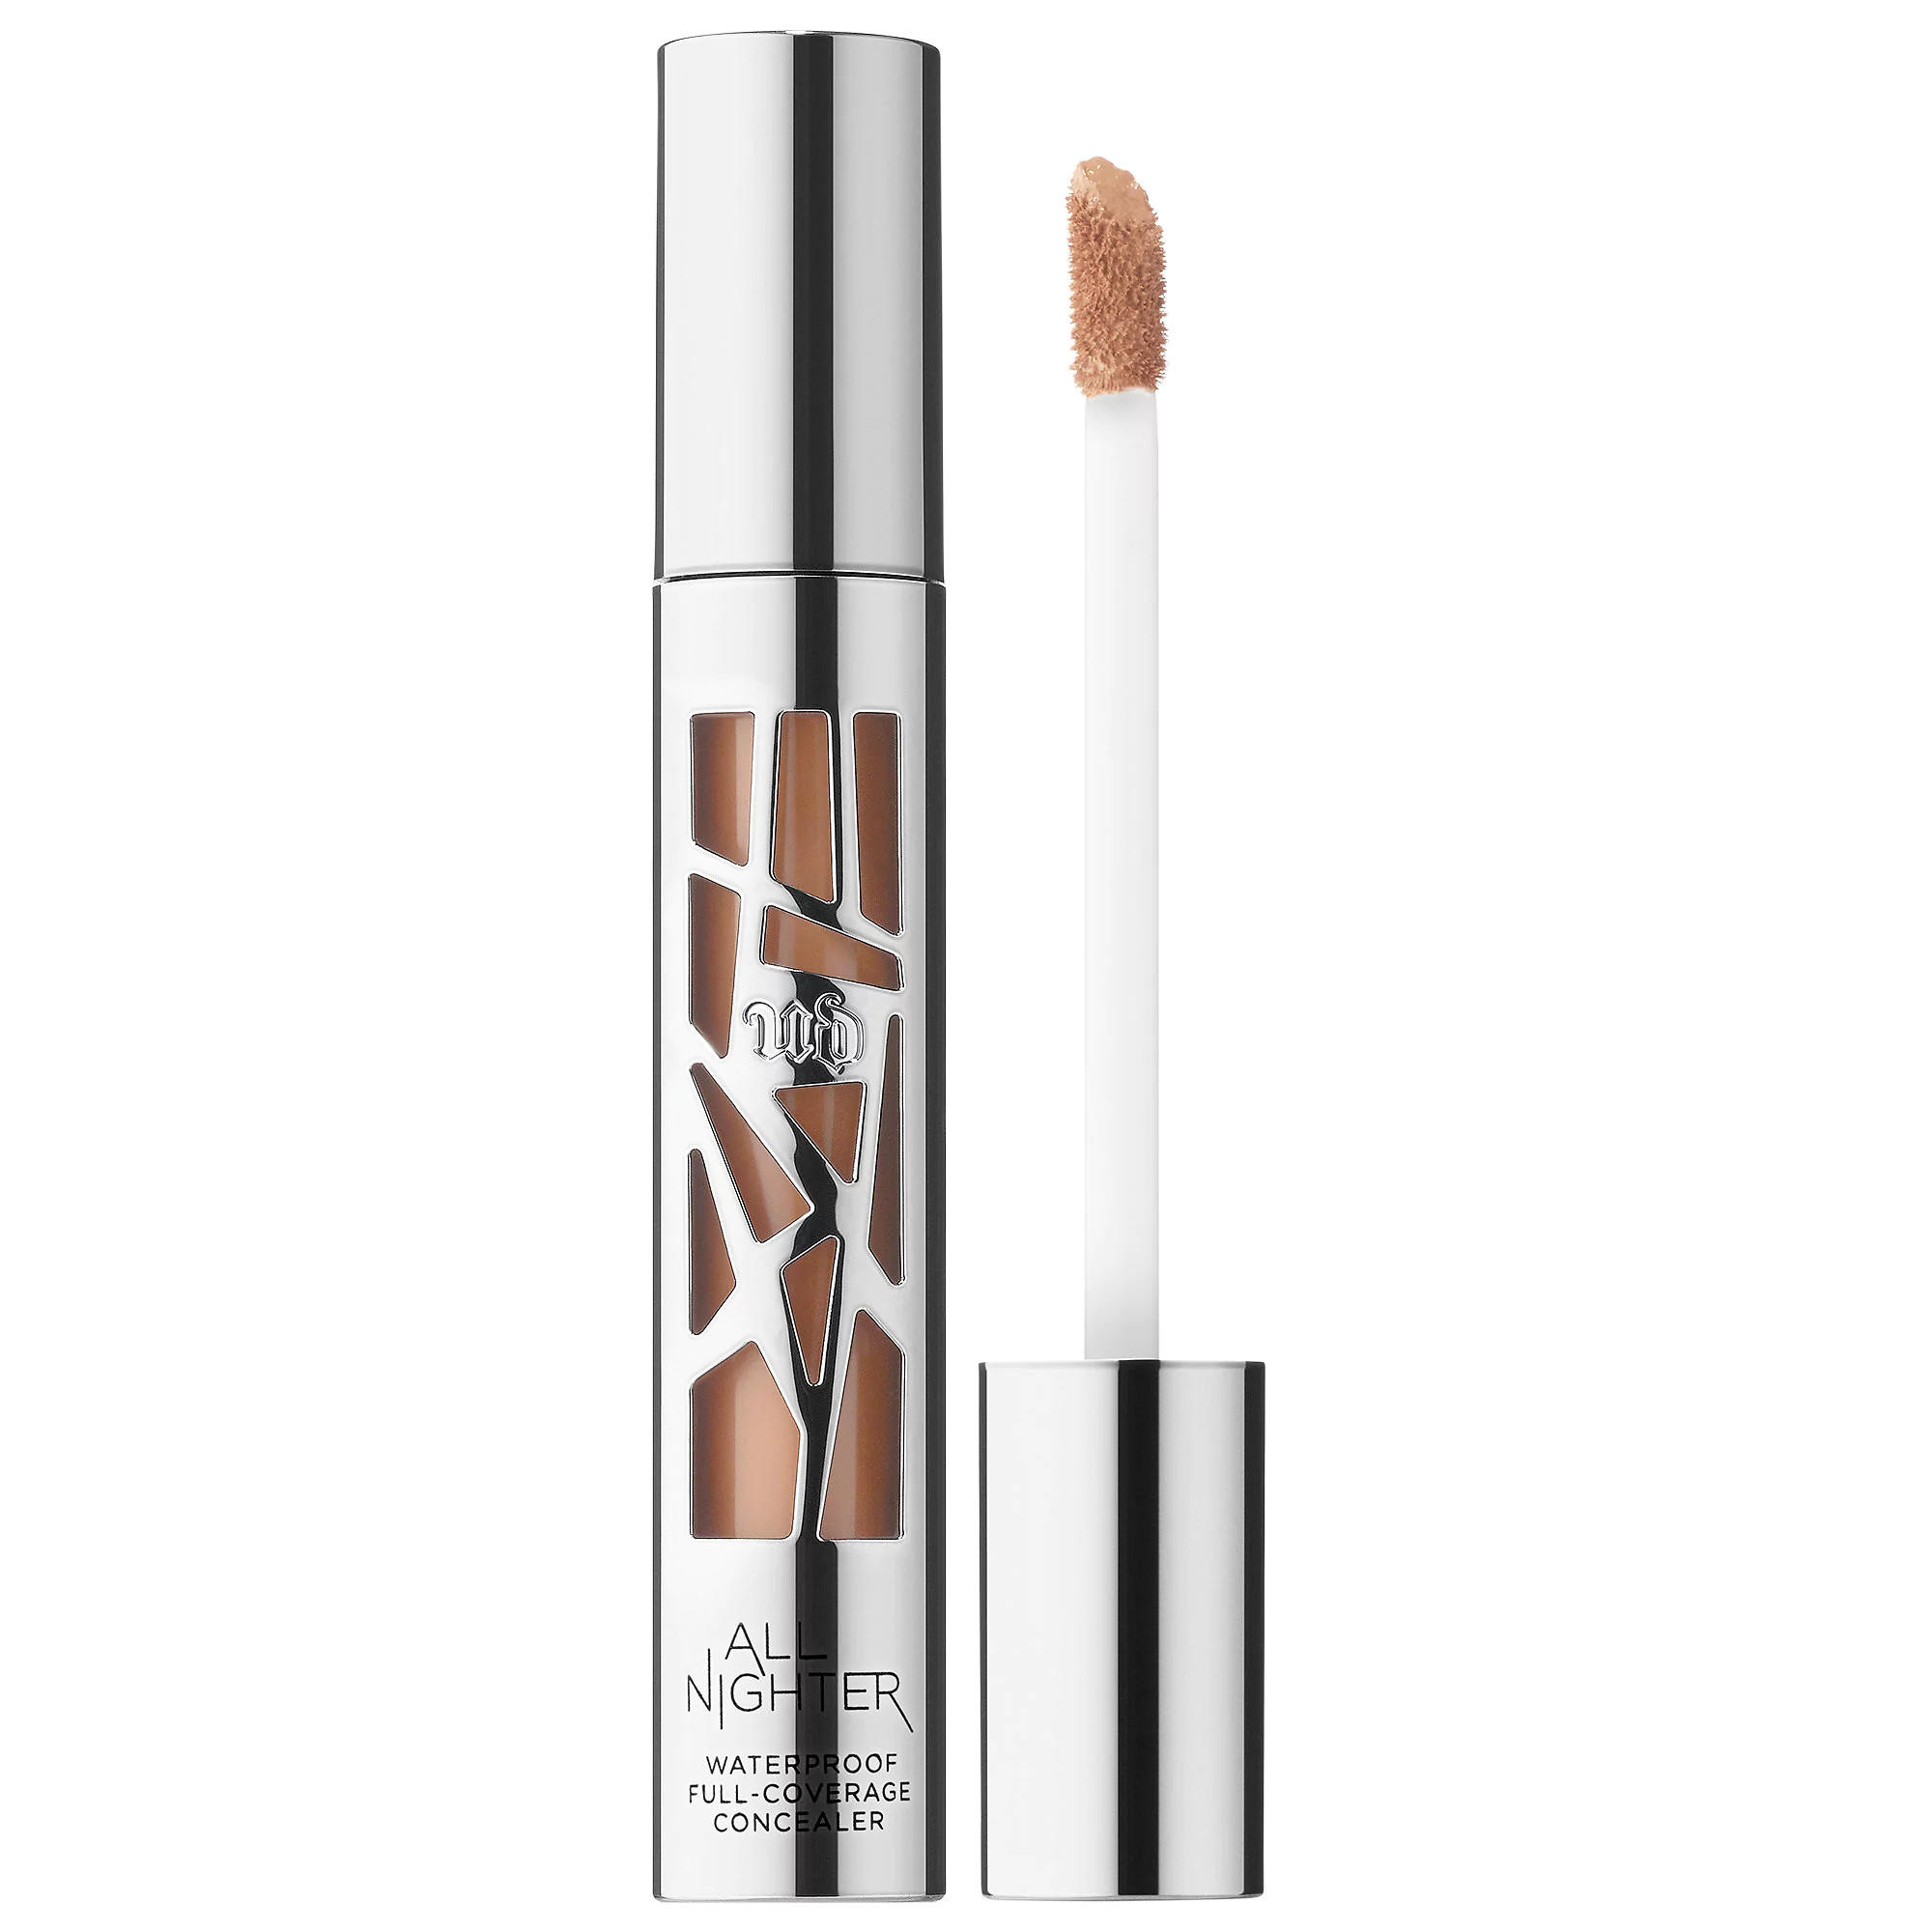 Urban Decay All Nighter Waterproof Full-Coverage Concealer Med-Light Warm